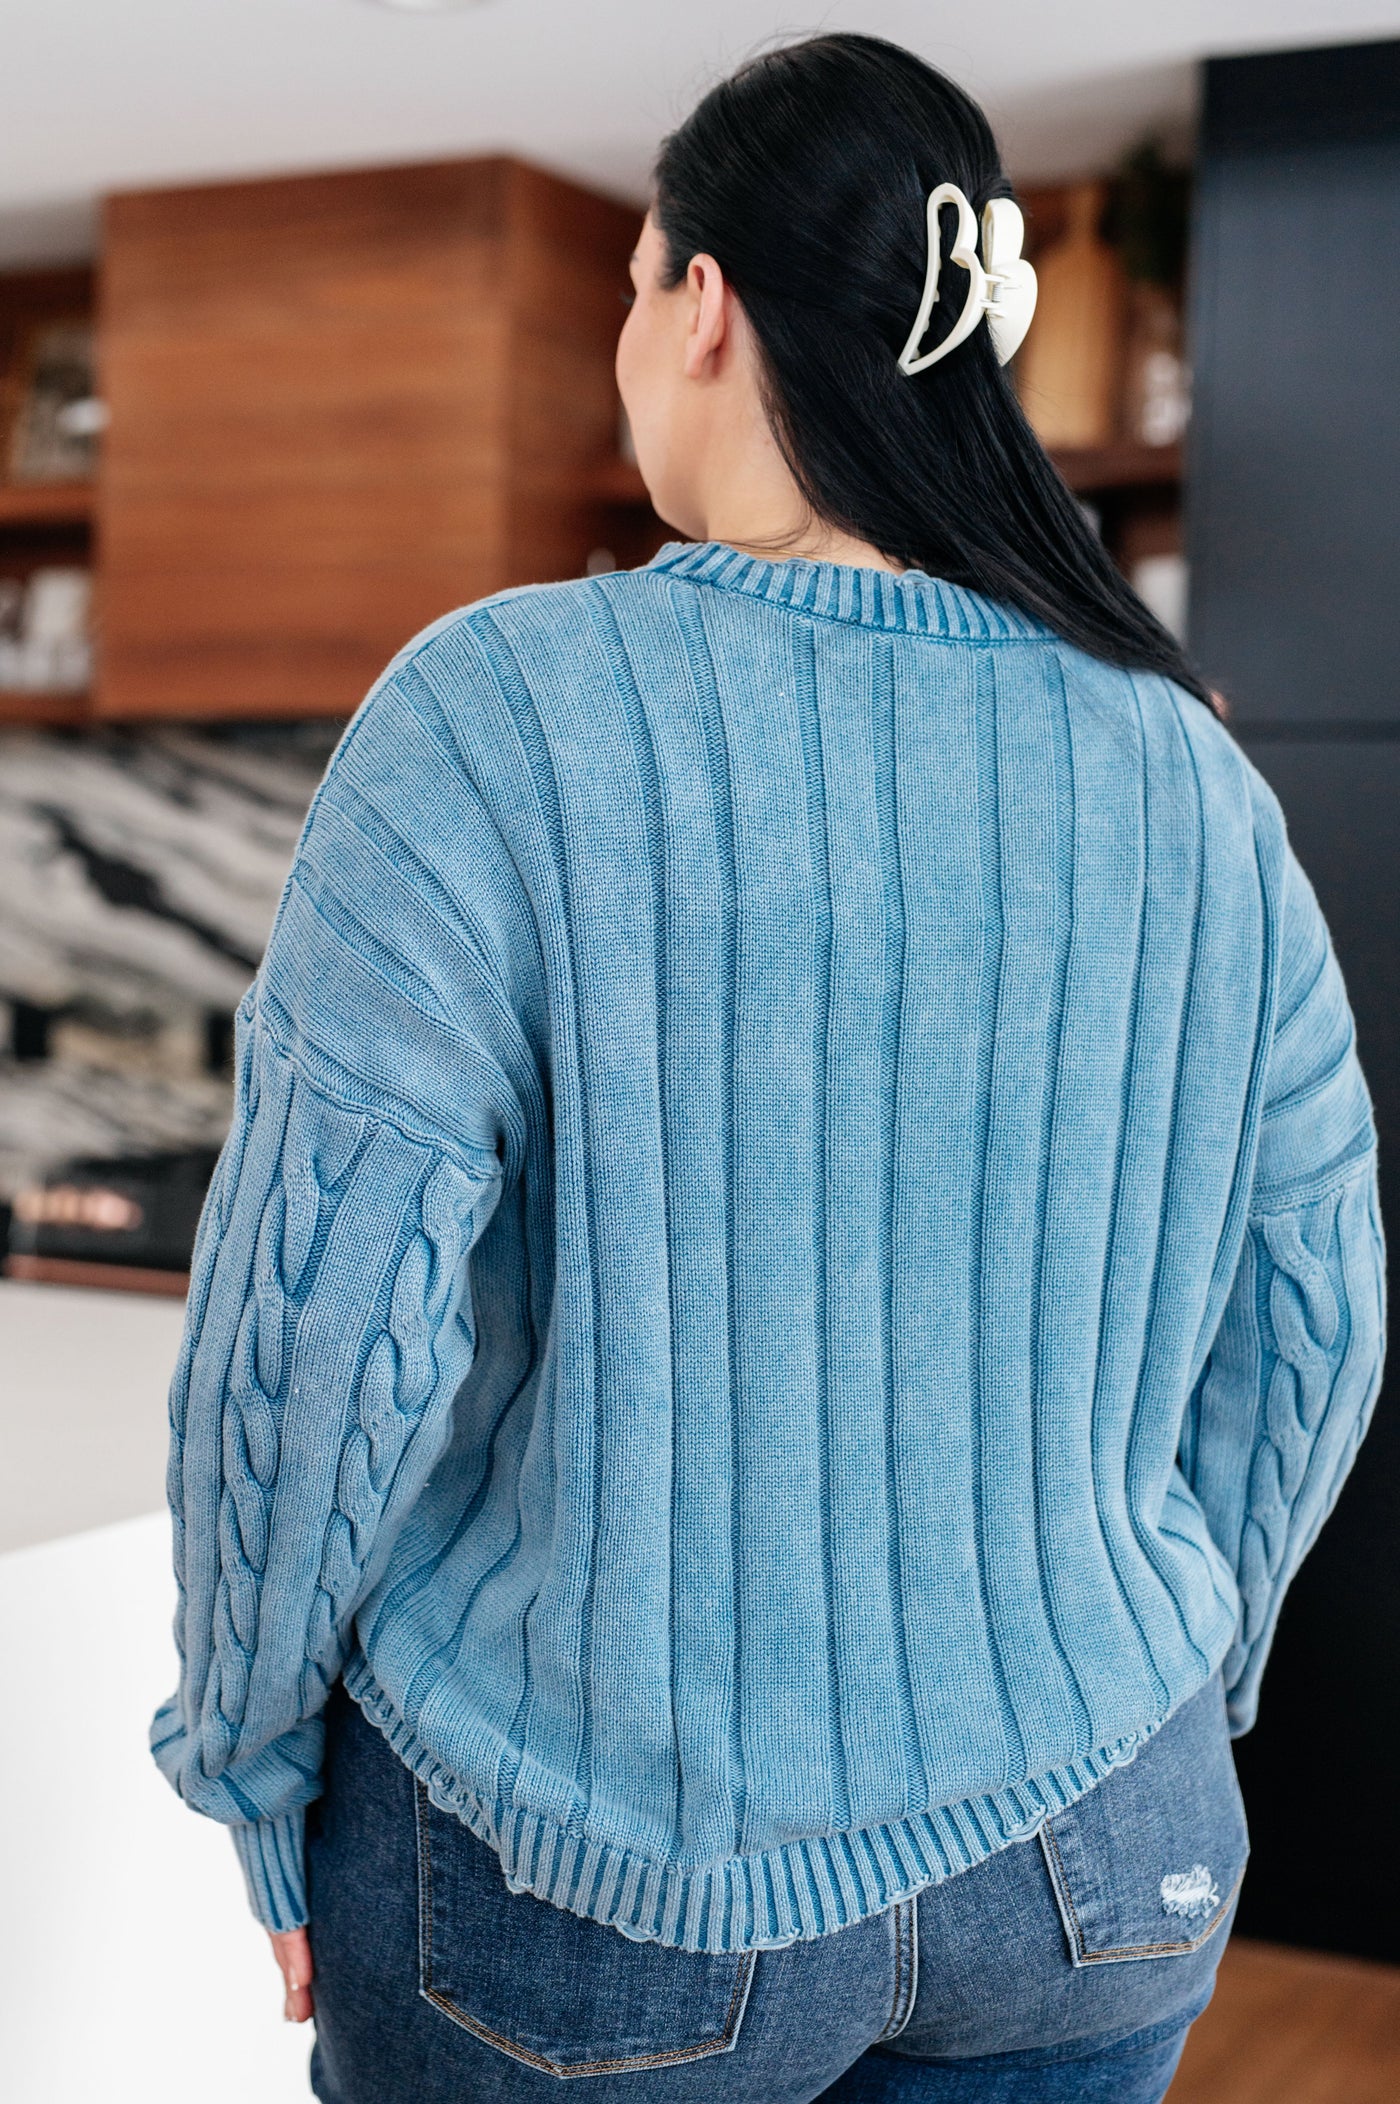 Stay stylish and comfortable with the In the Right Direction Cable Knit Sweater